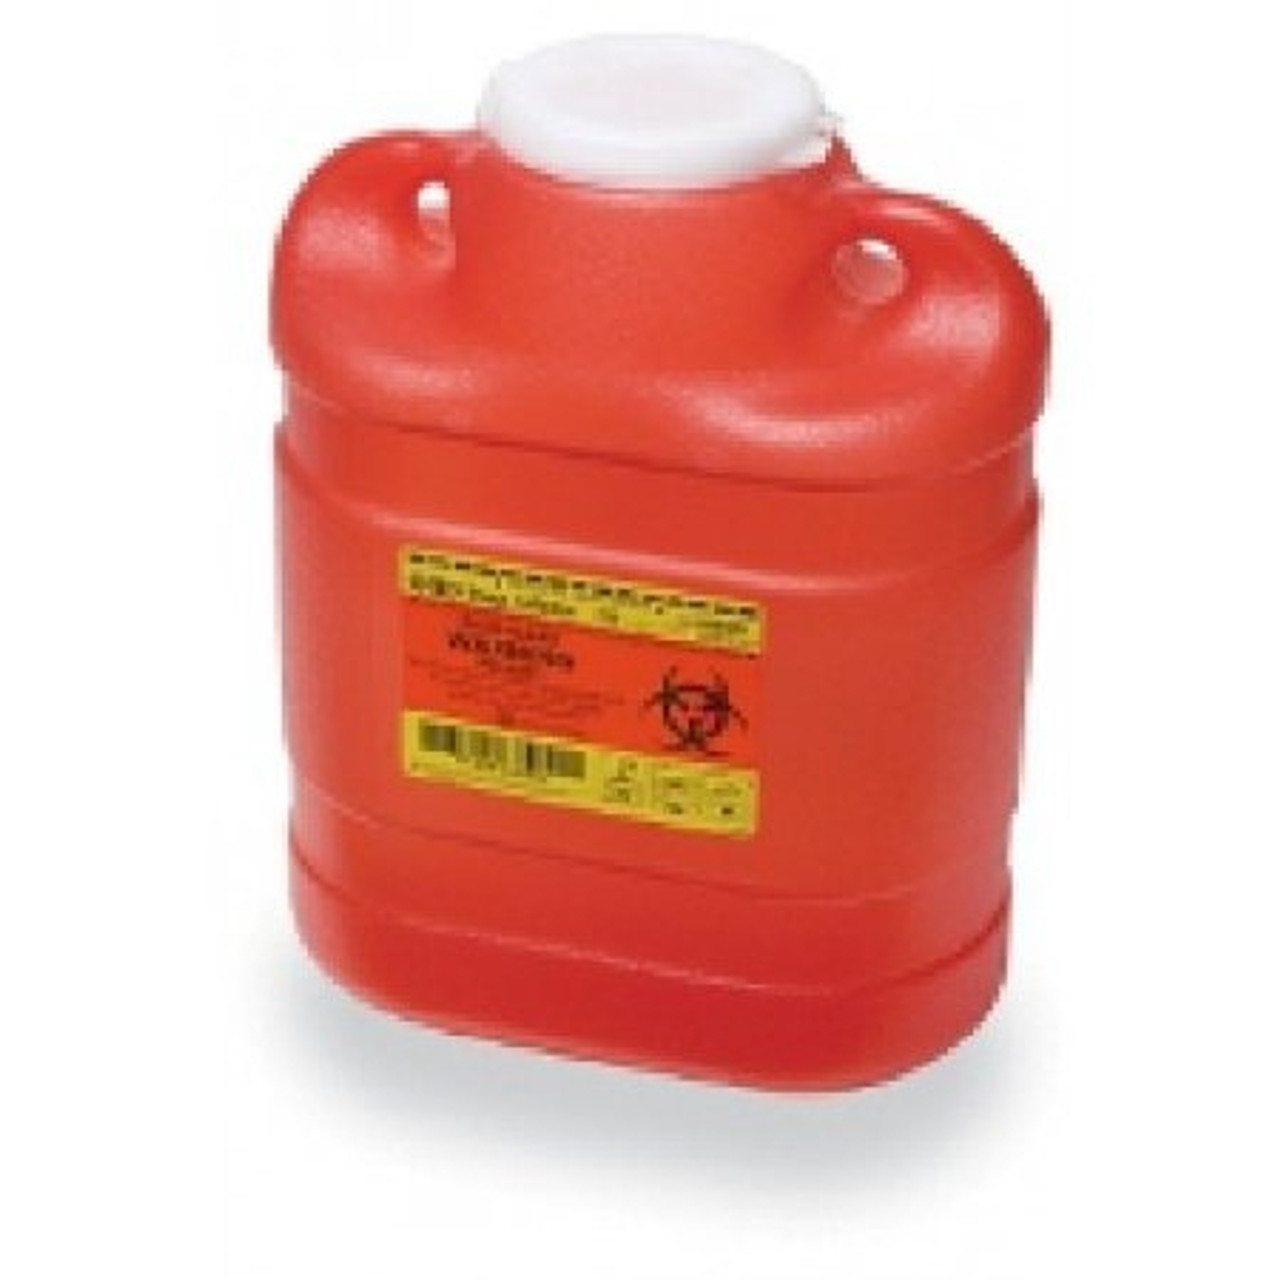 BD 6.9 Quart Sharps Container, Red